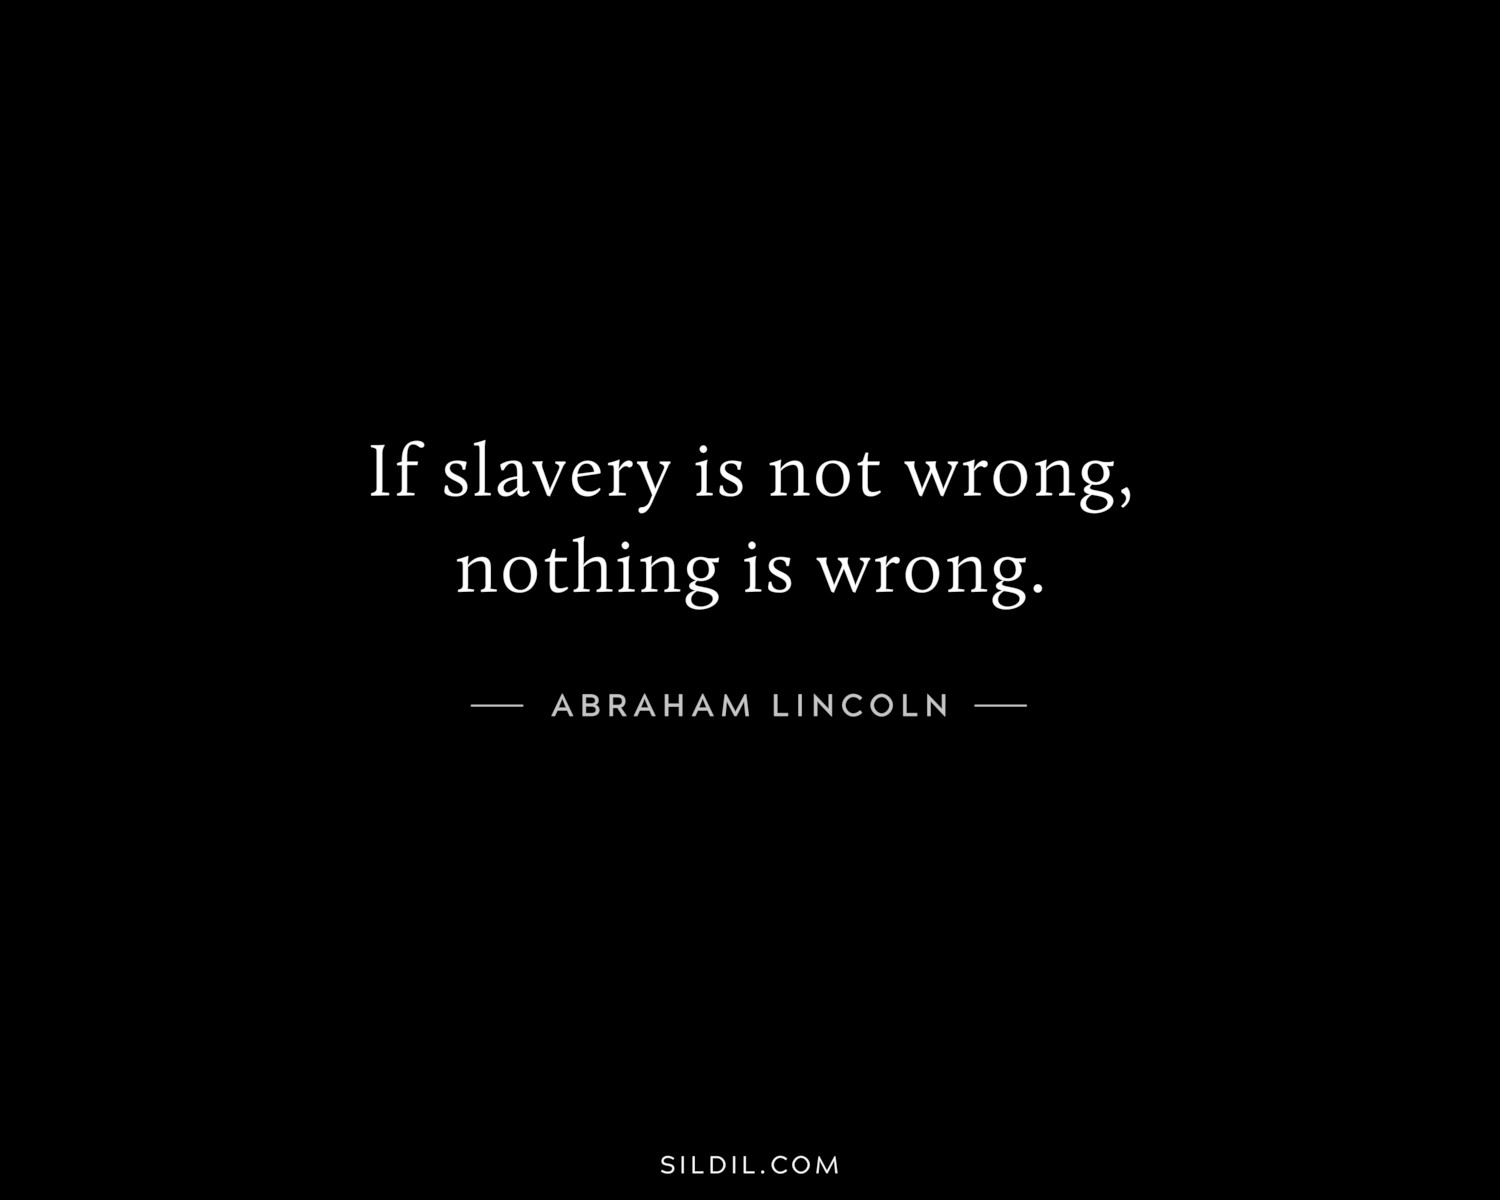 If slavery is not wrong, nothing is wrong.